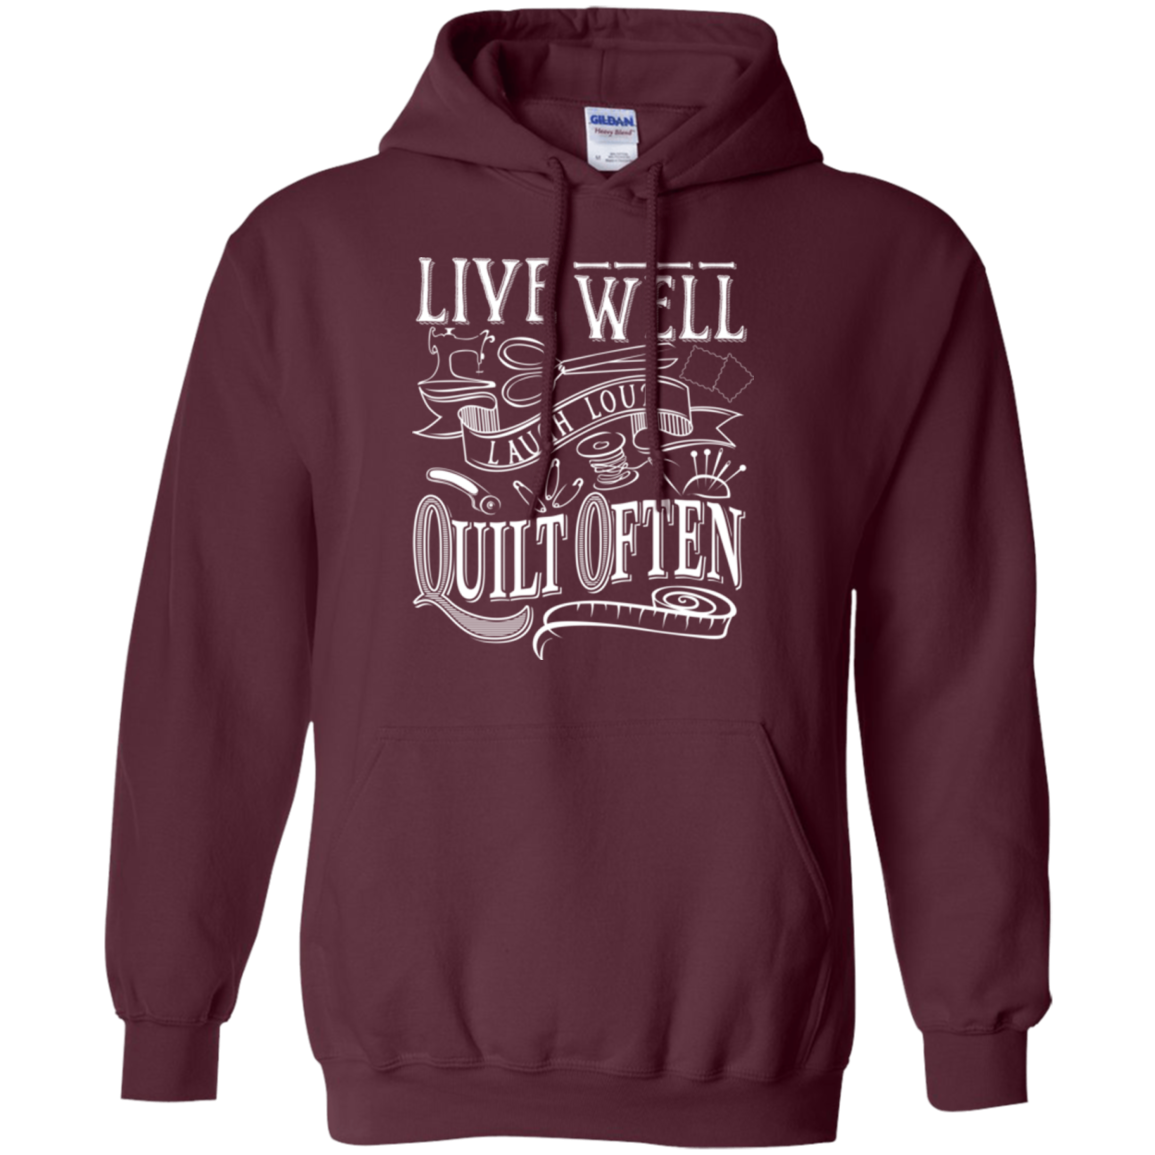 Live Well, Quilt Often Pullover Hoodie